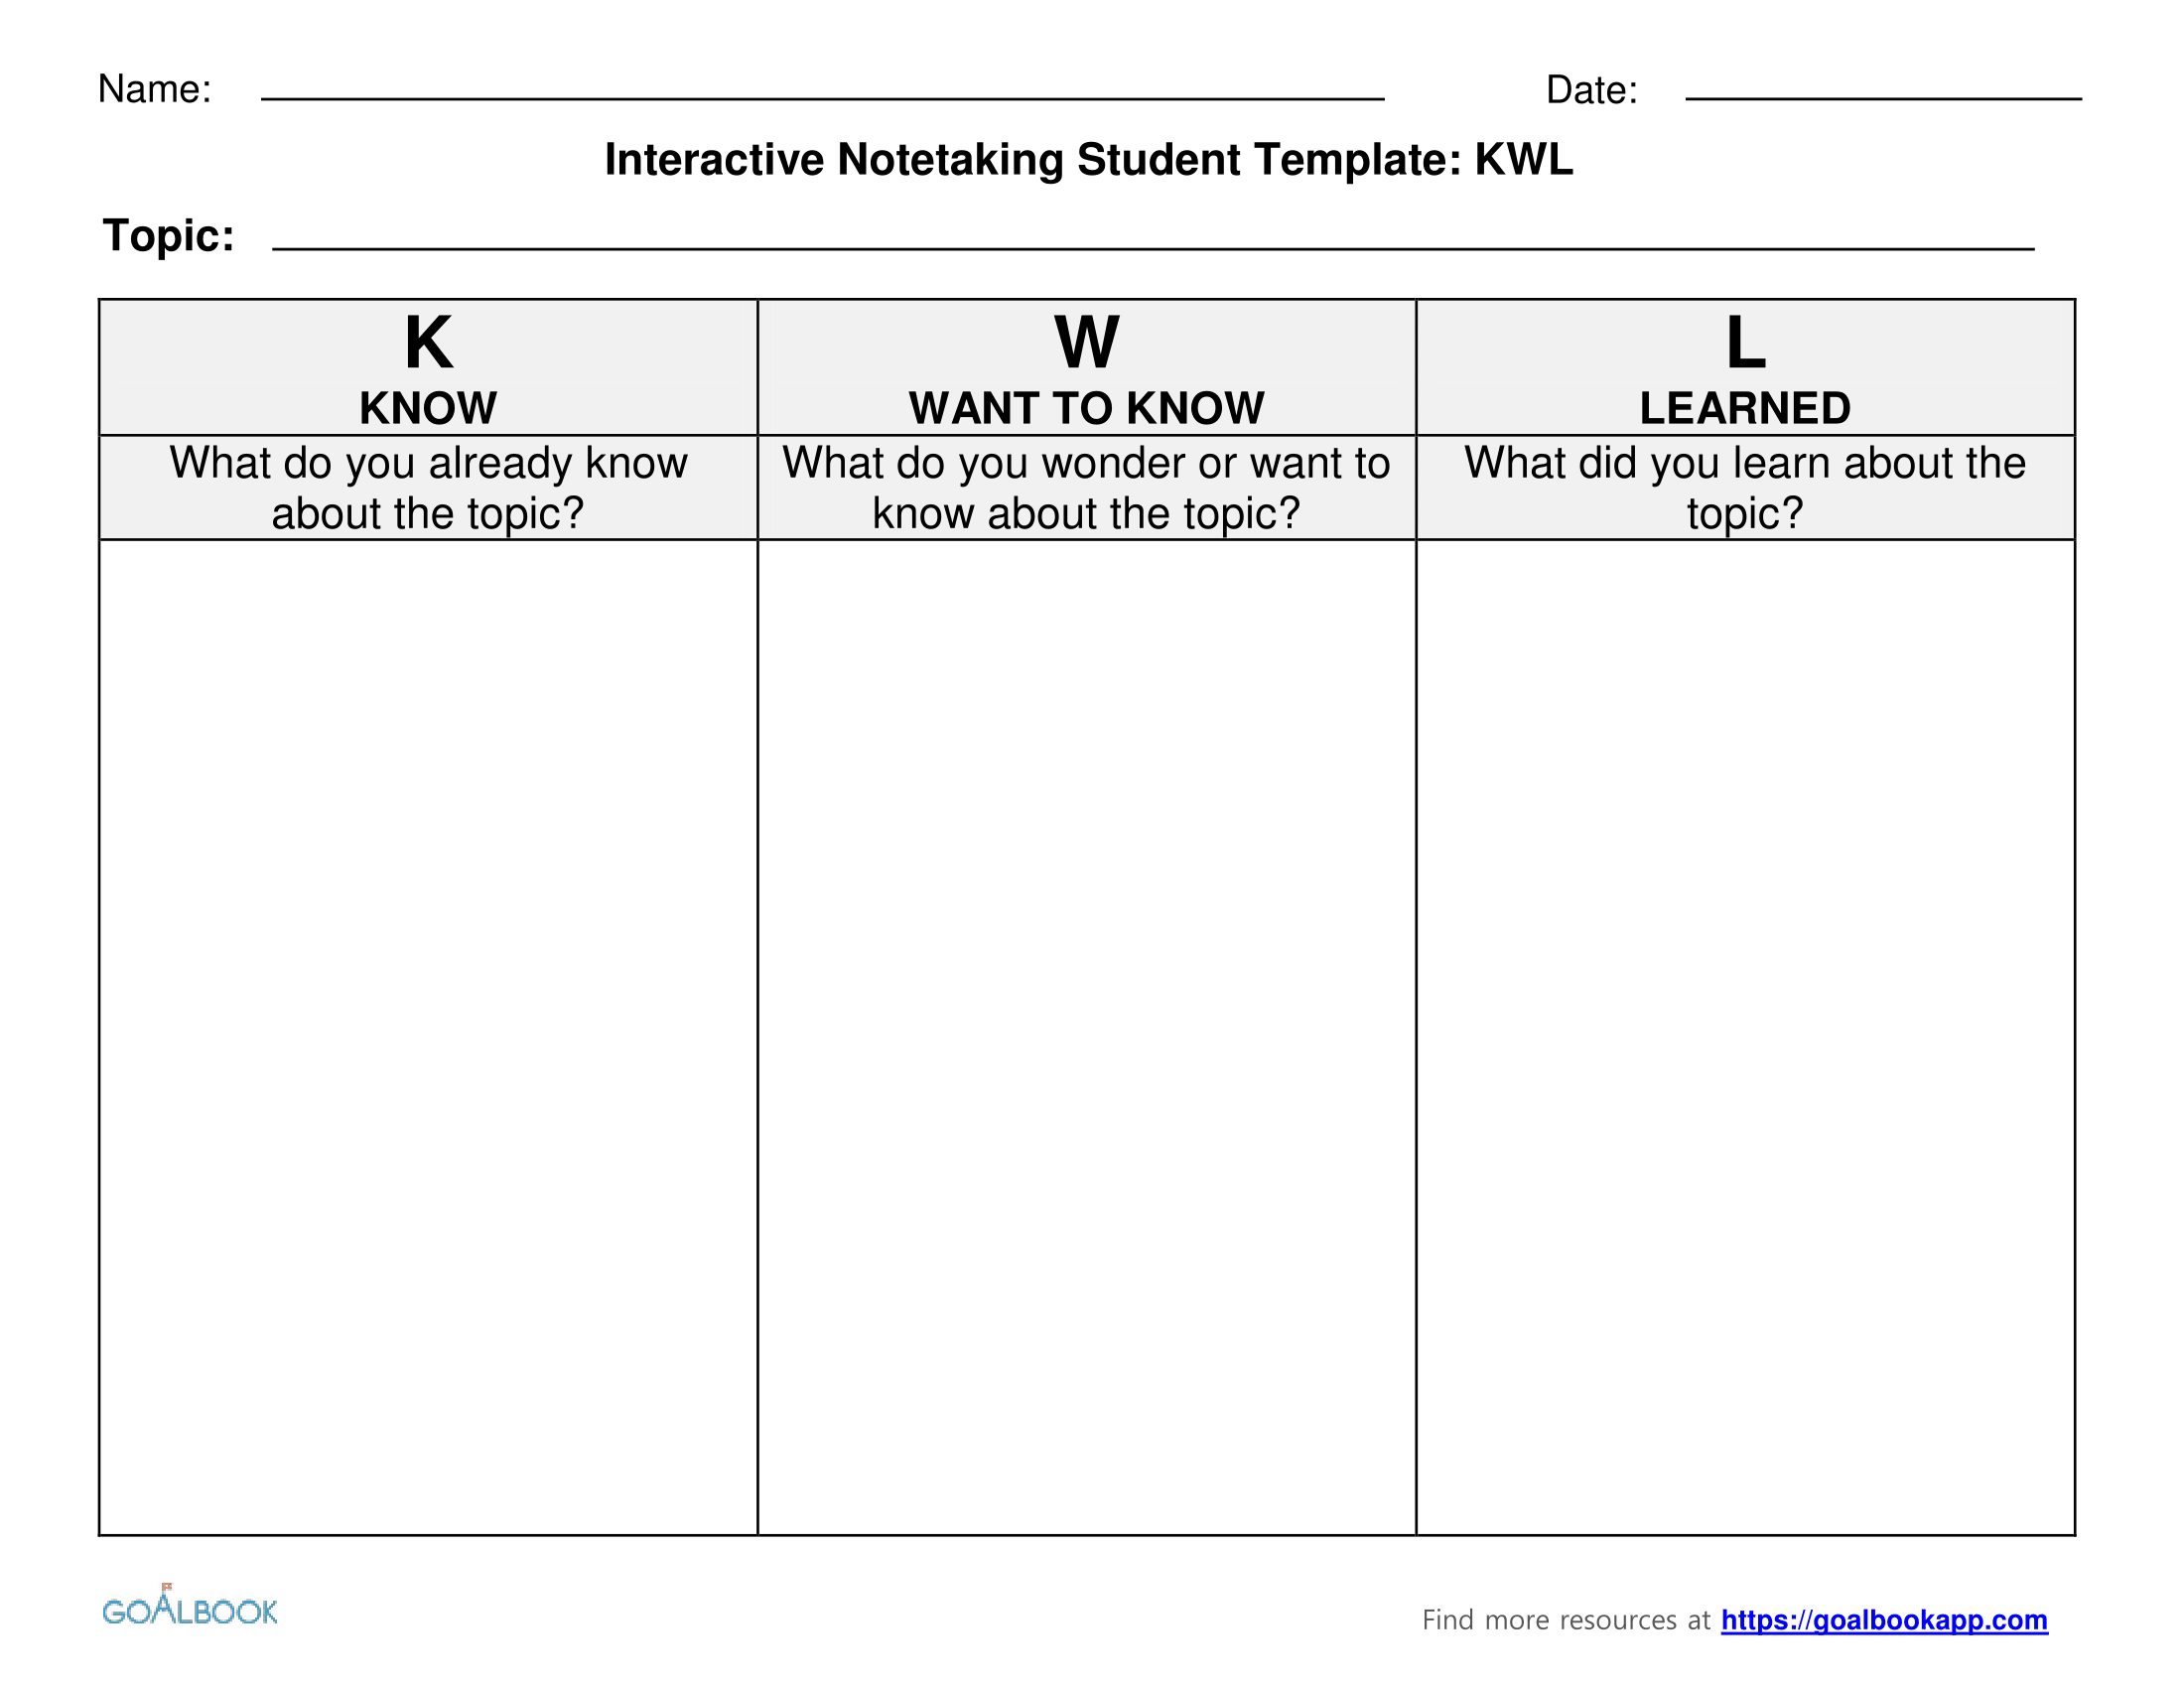 Kwl Charts For Interactive Notetaking | Learning Log Within Kwl Chart Template Word Document